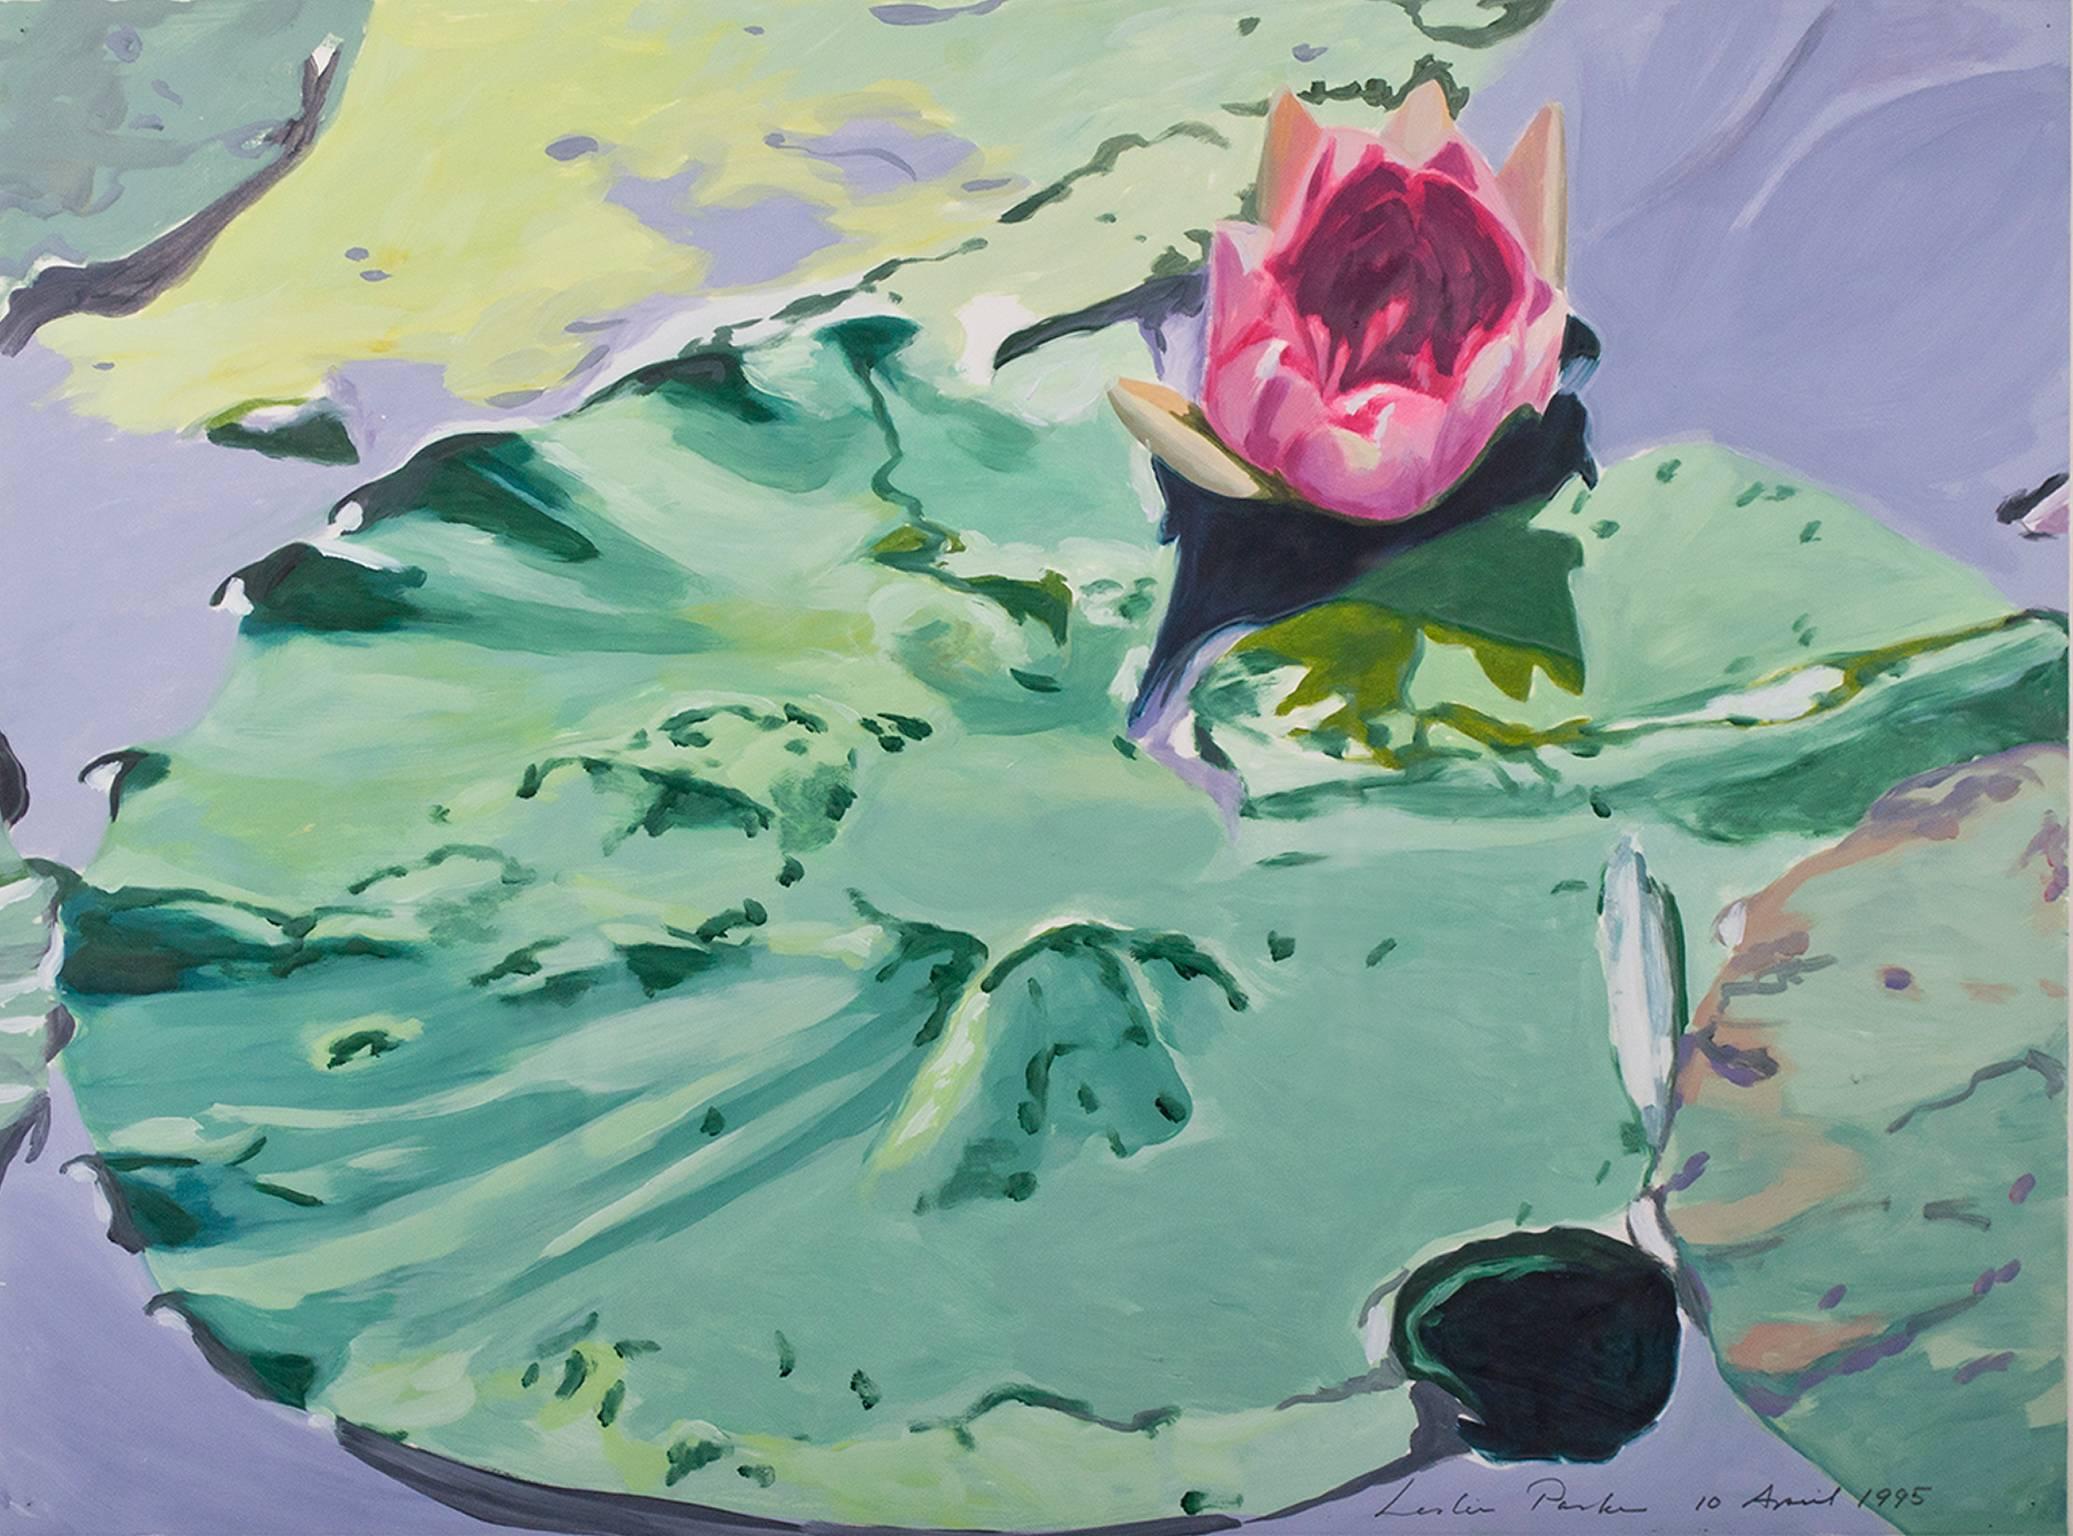 "Giverny Series: 10 April 1995," Oil on Paper Lily Pads signed by Leslie Parke